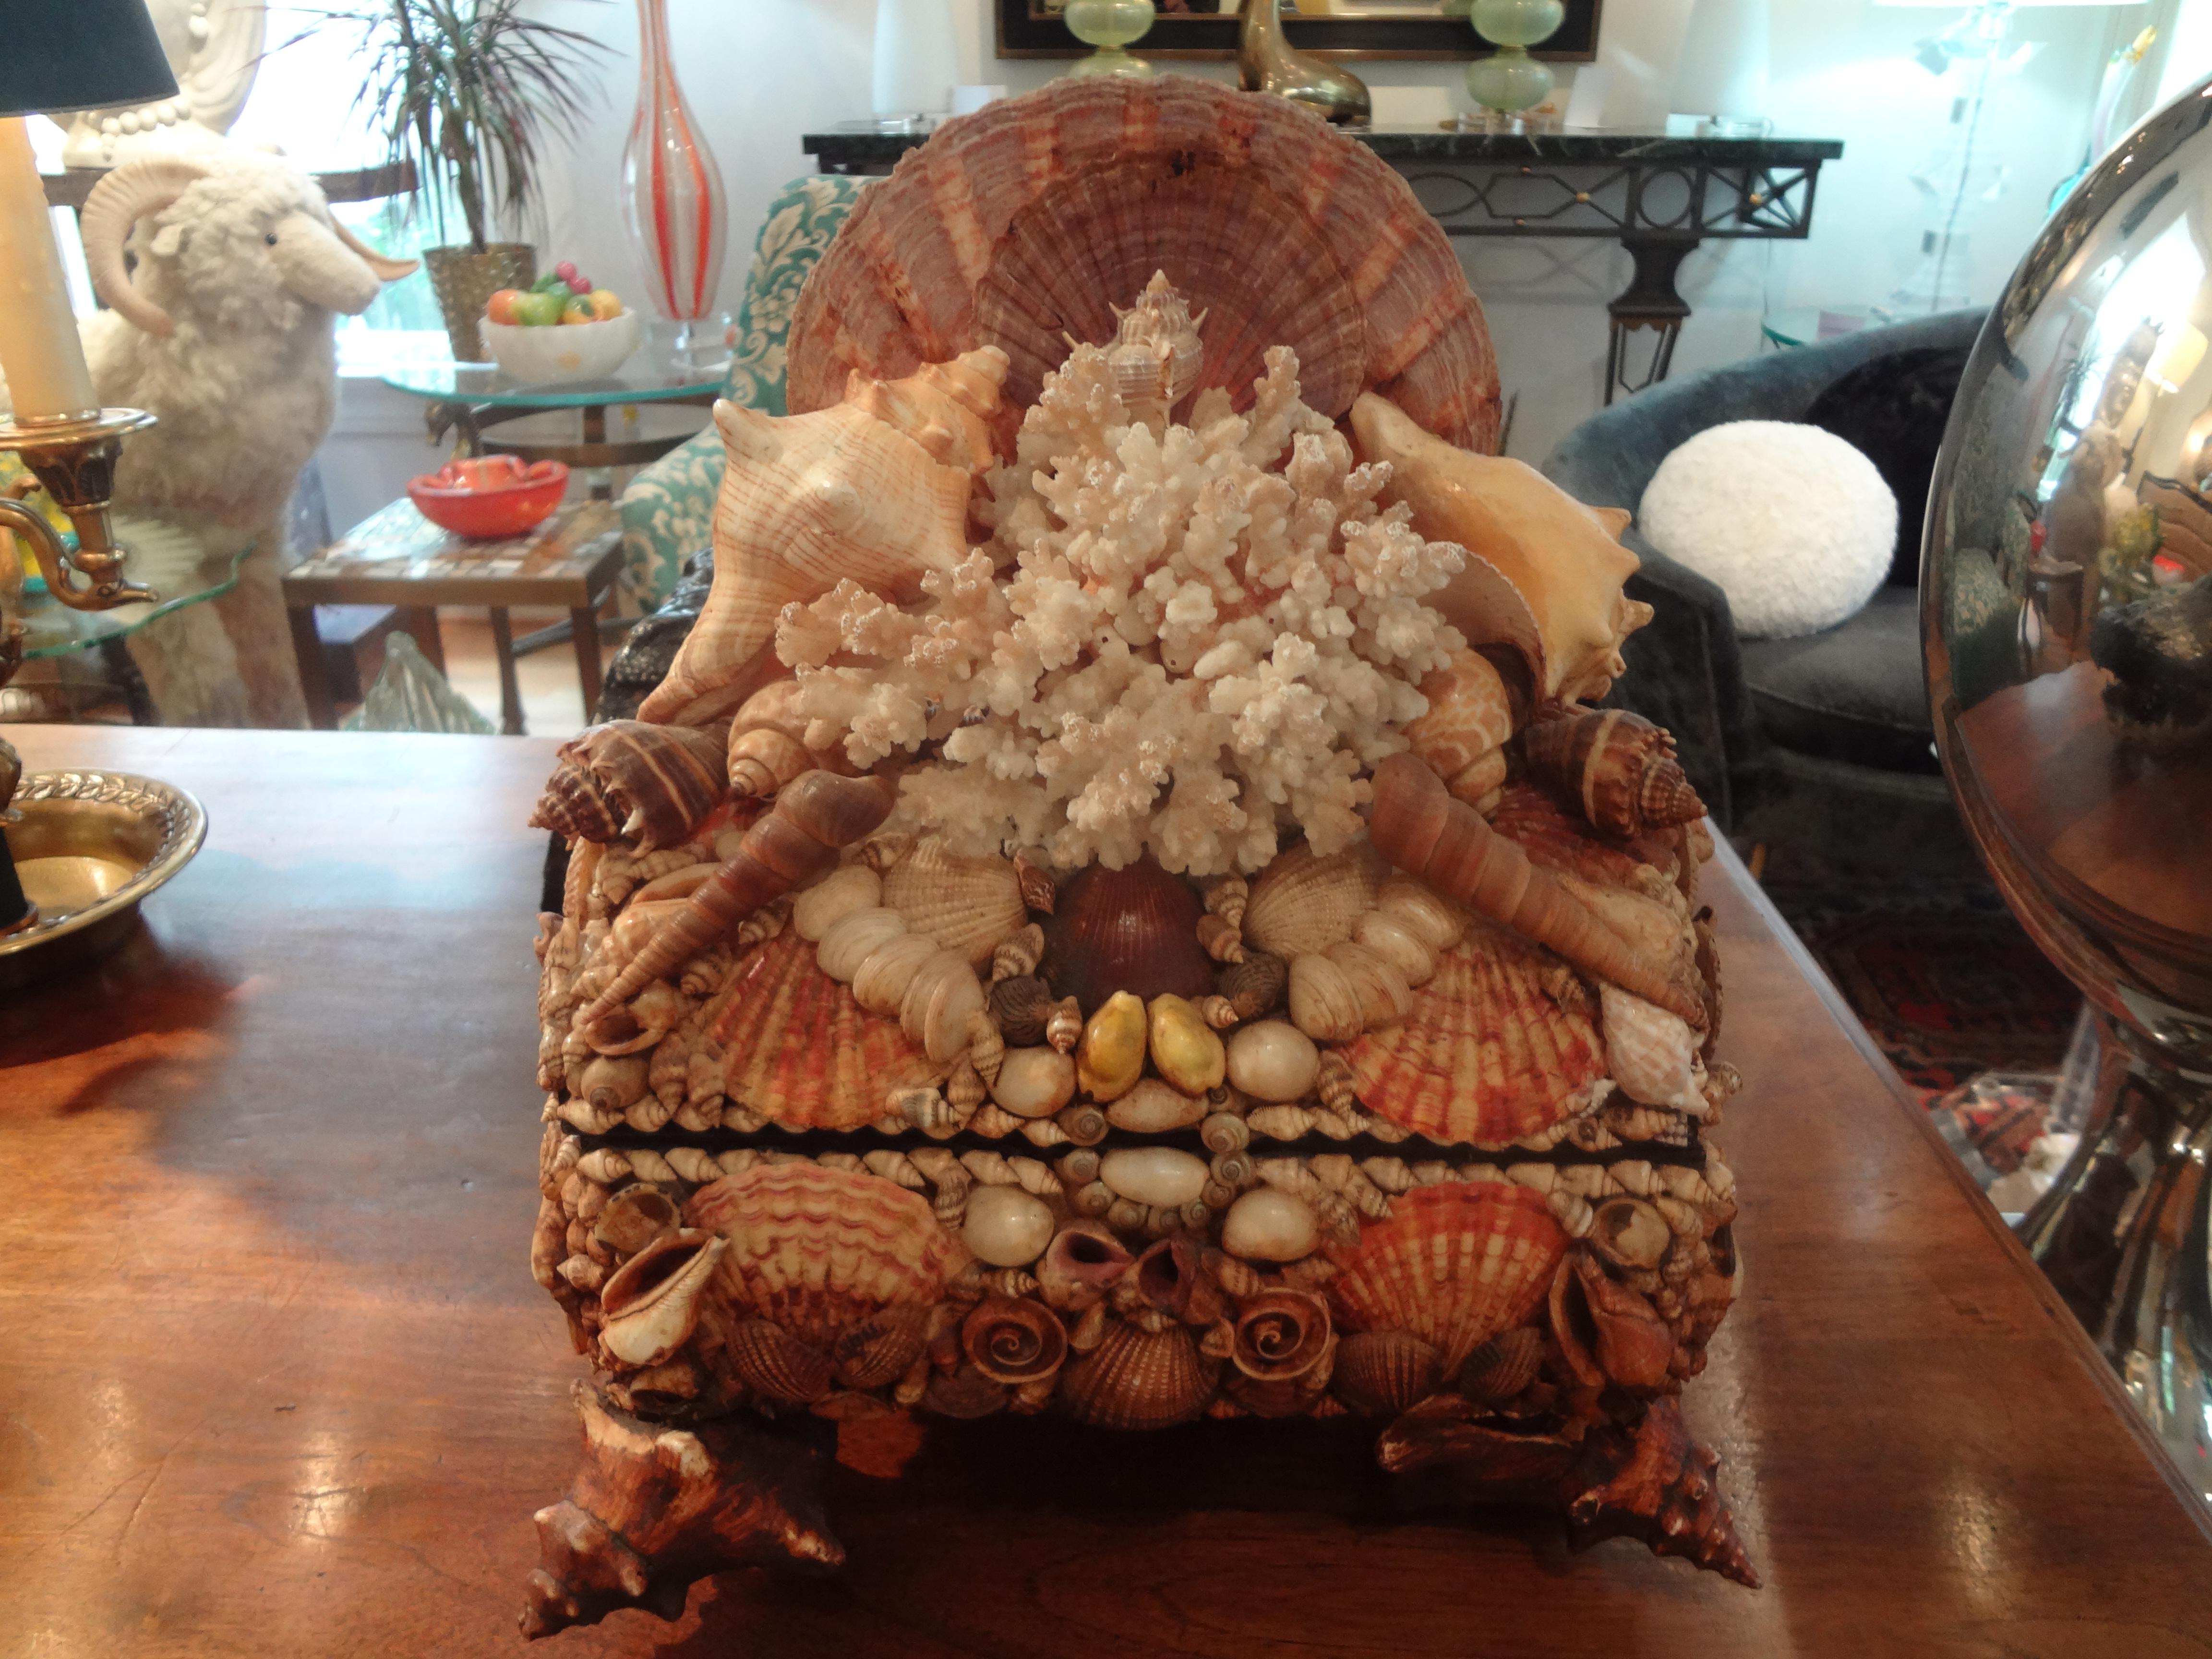 Unusual 20th century decorative box adorned with seashells and coral. This fabulous hand decorated seashell box or jewel casket would make a great cocktail table or powder bath accessory.